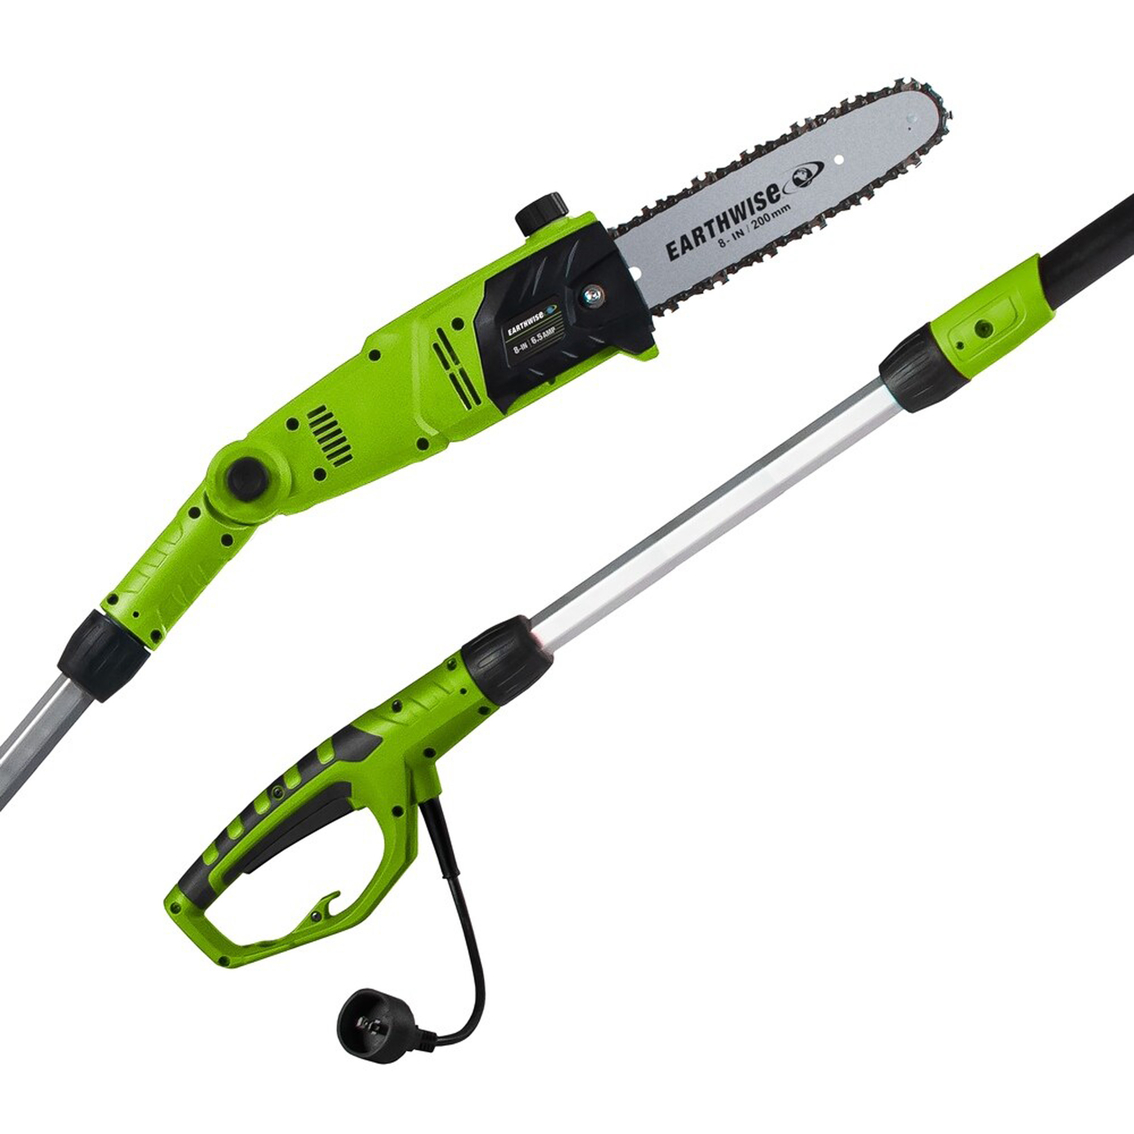 Earthwise 8 in. 6.5A Corded Pole Saw - Image 2 of 2